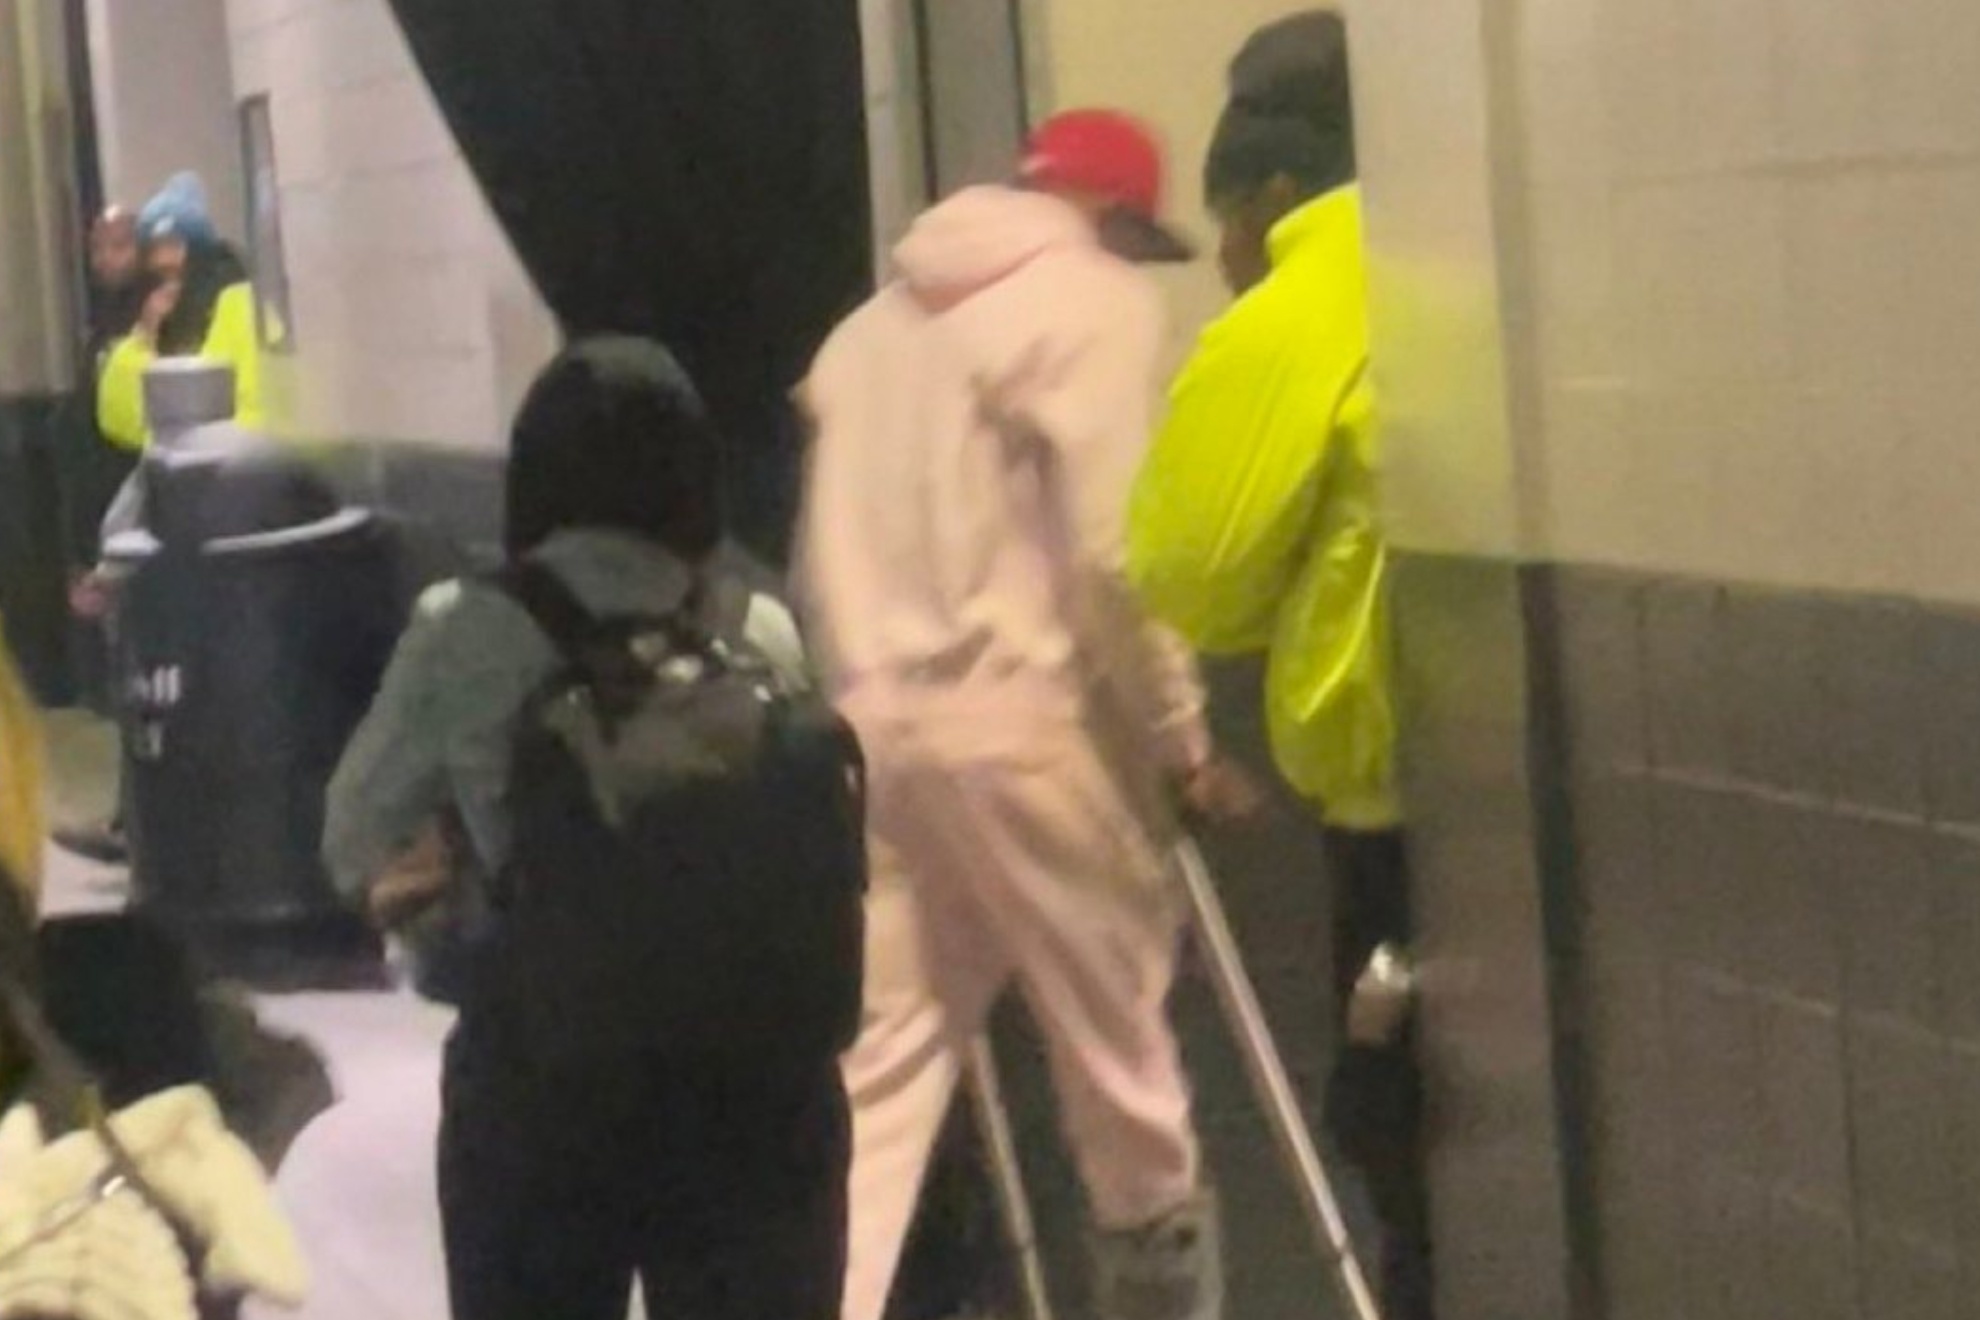 DeVonta Smith leaving the Lincoln Financial Field using walking aides.